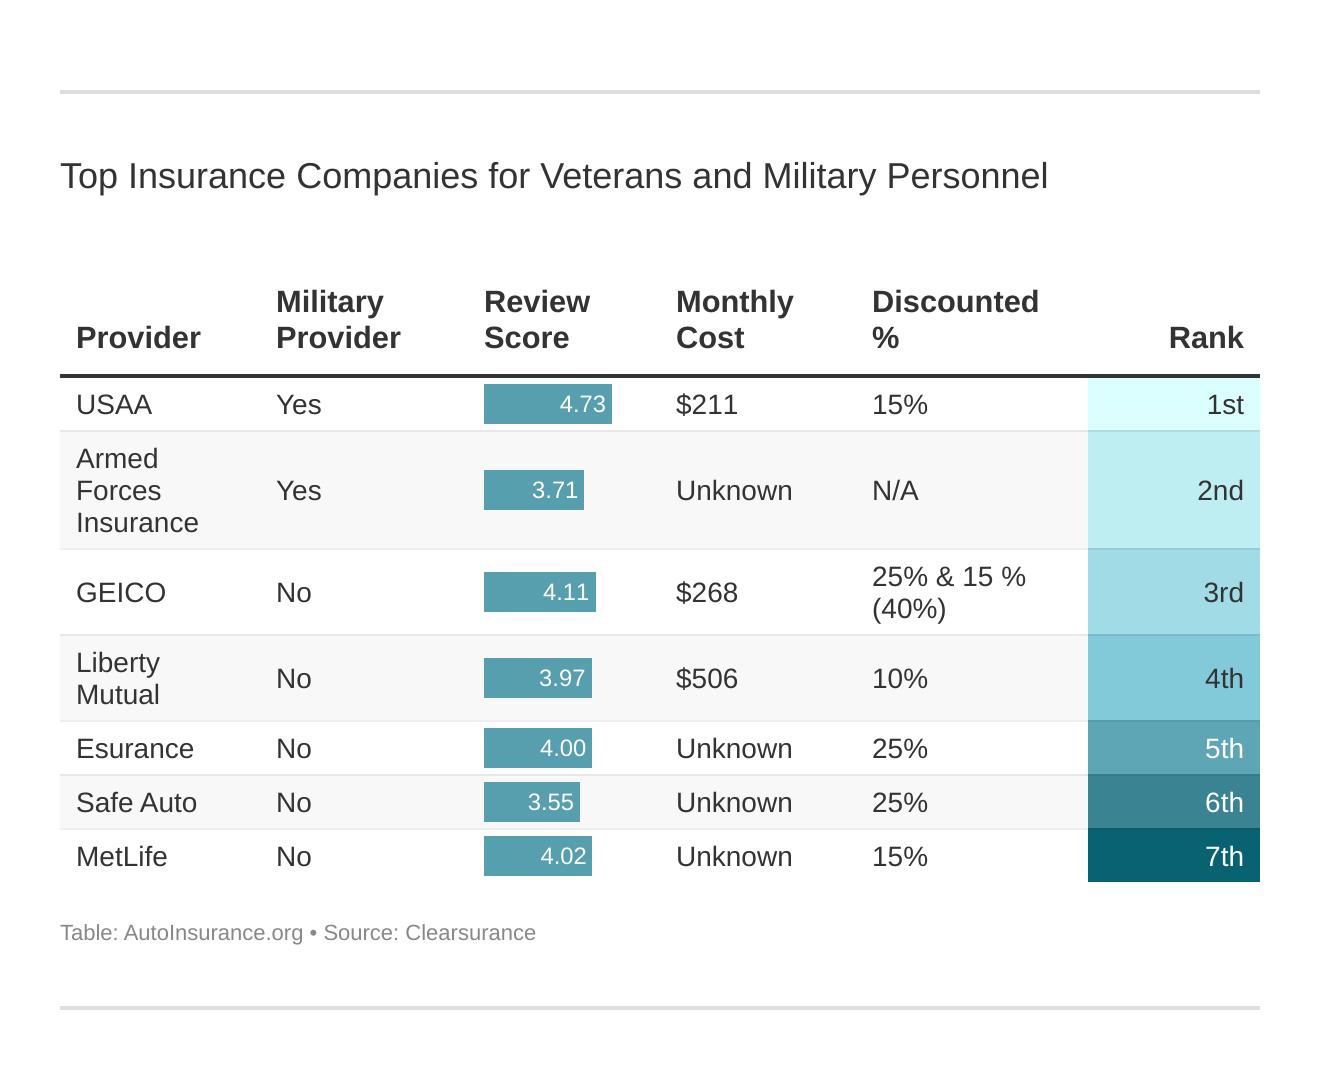 Top Insurance Companies for Veterans and Military Personnel